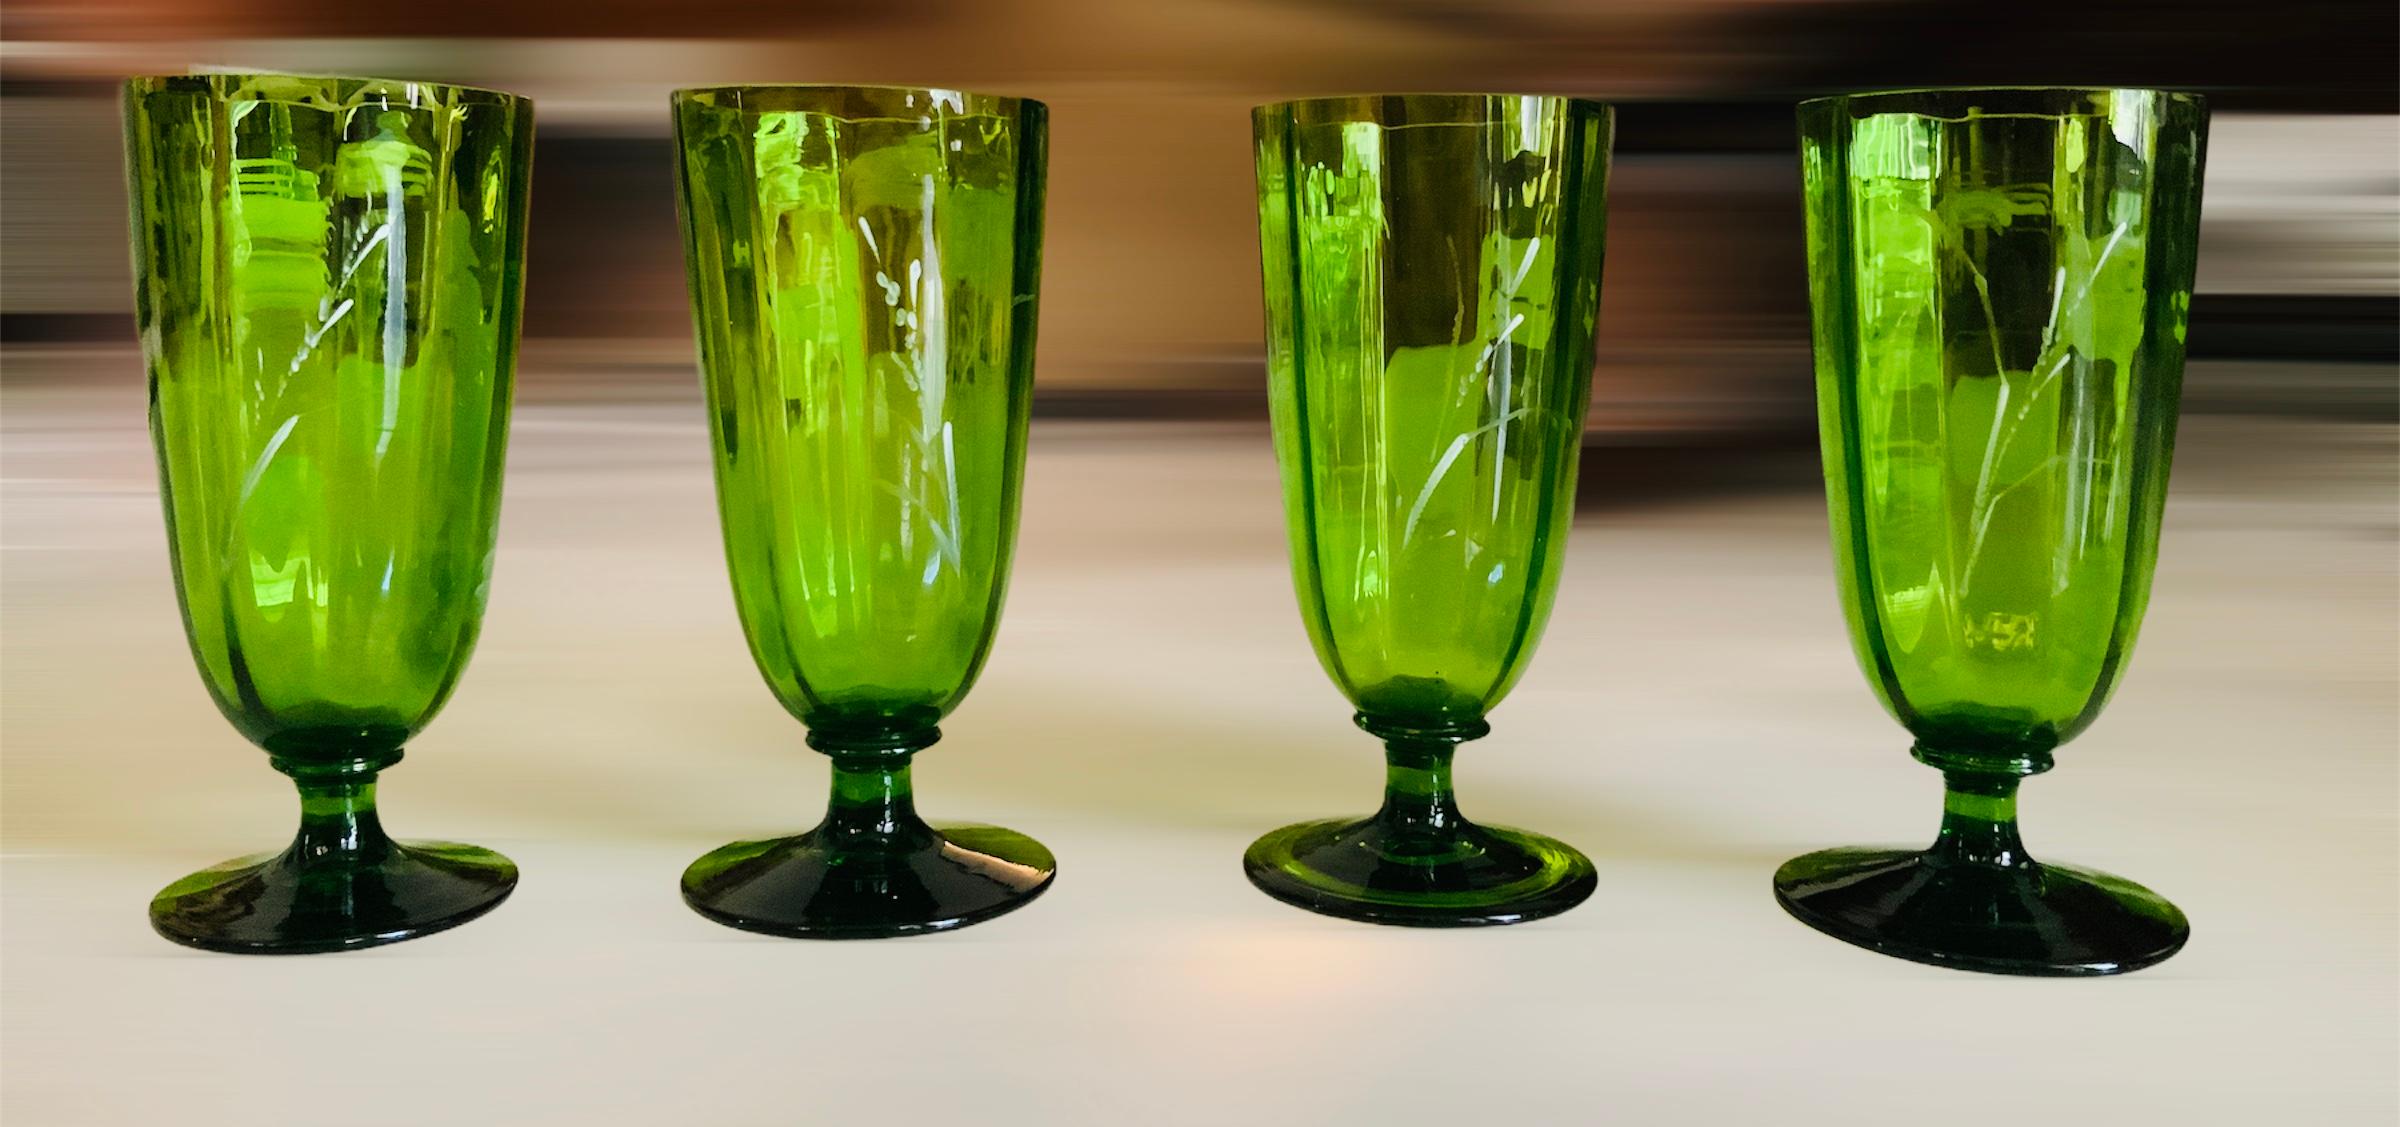 mary gregory green glass